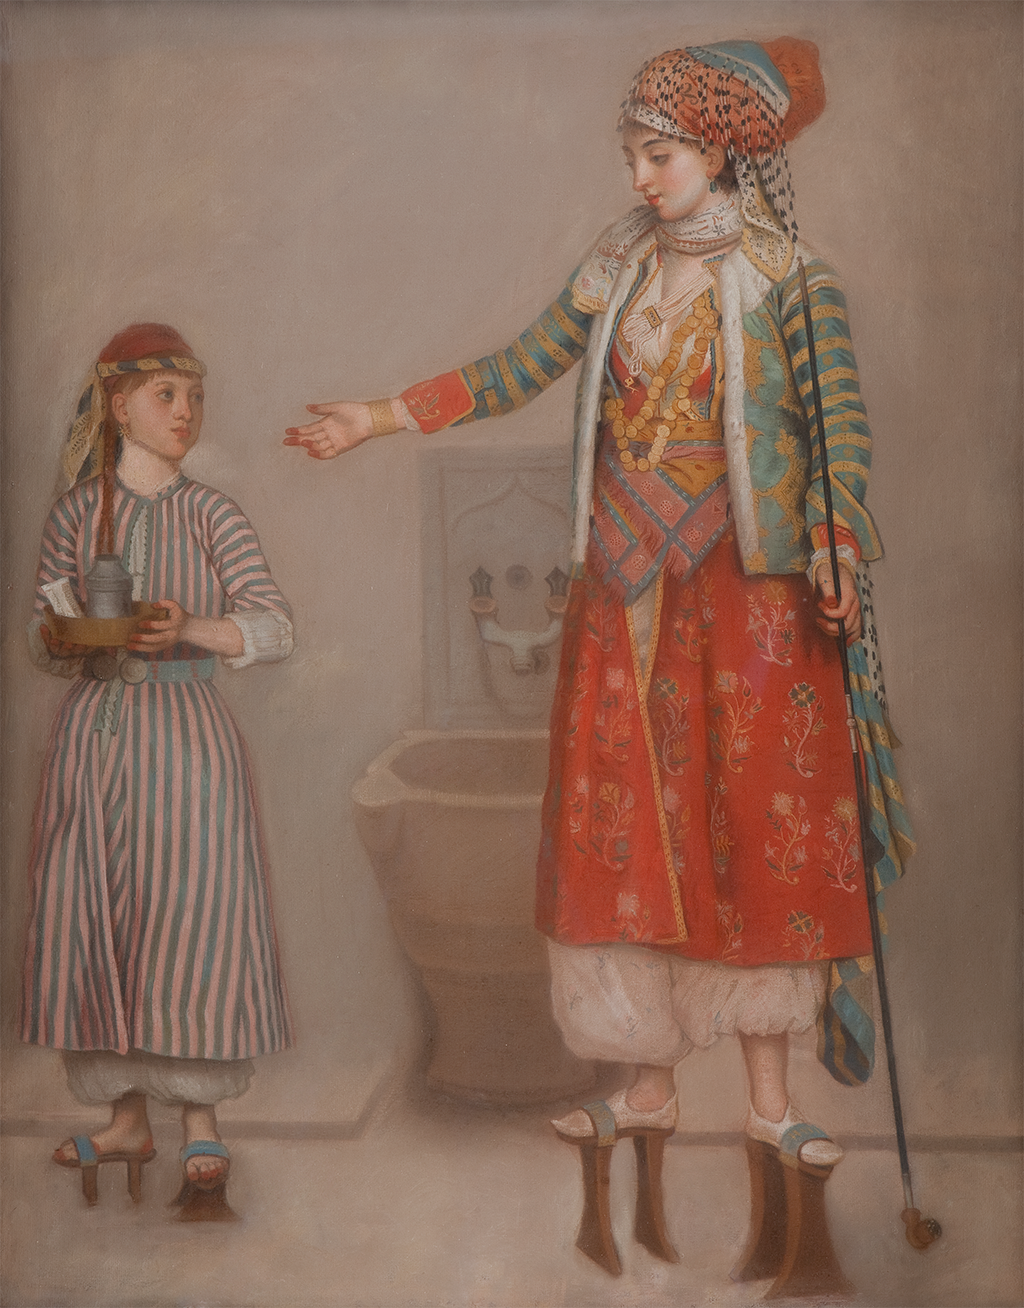 A painting of a woman and a young girl both standing on wooden hilts tied to their feet. The woman who wears red clothing reaches her hand out toward the young girl. The young girl also wears a cap and a dress with vertical stripes. She carries a bowl with a metal can inside it. In the background there is a sink sculpted into the wall.